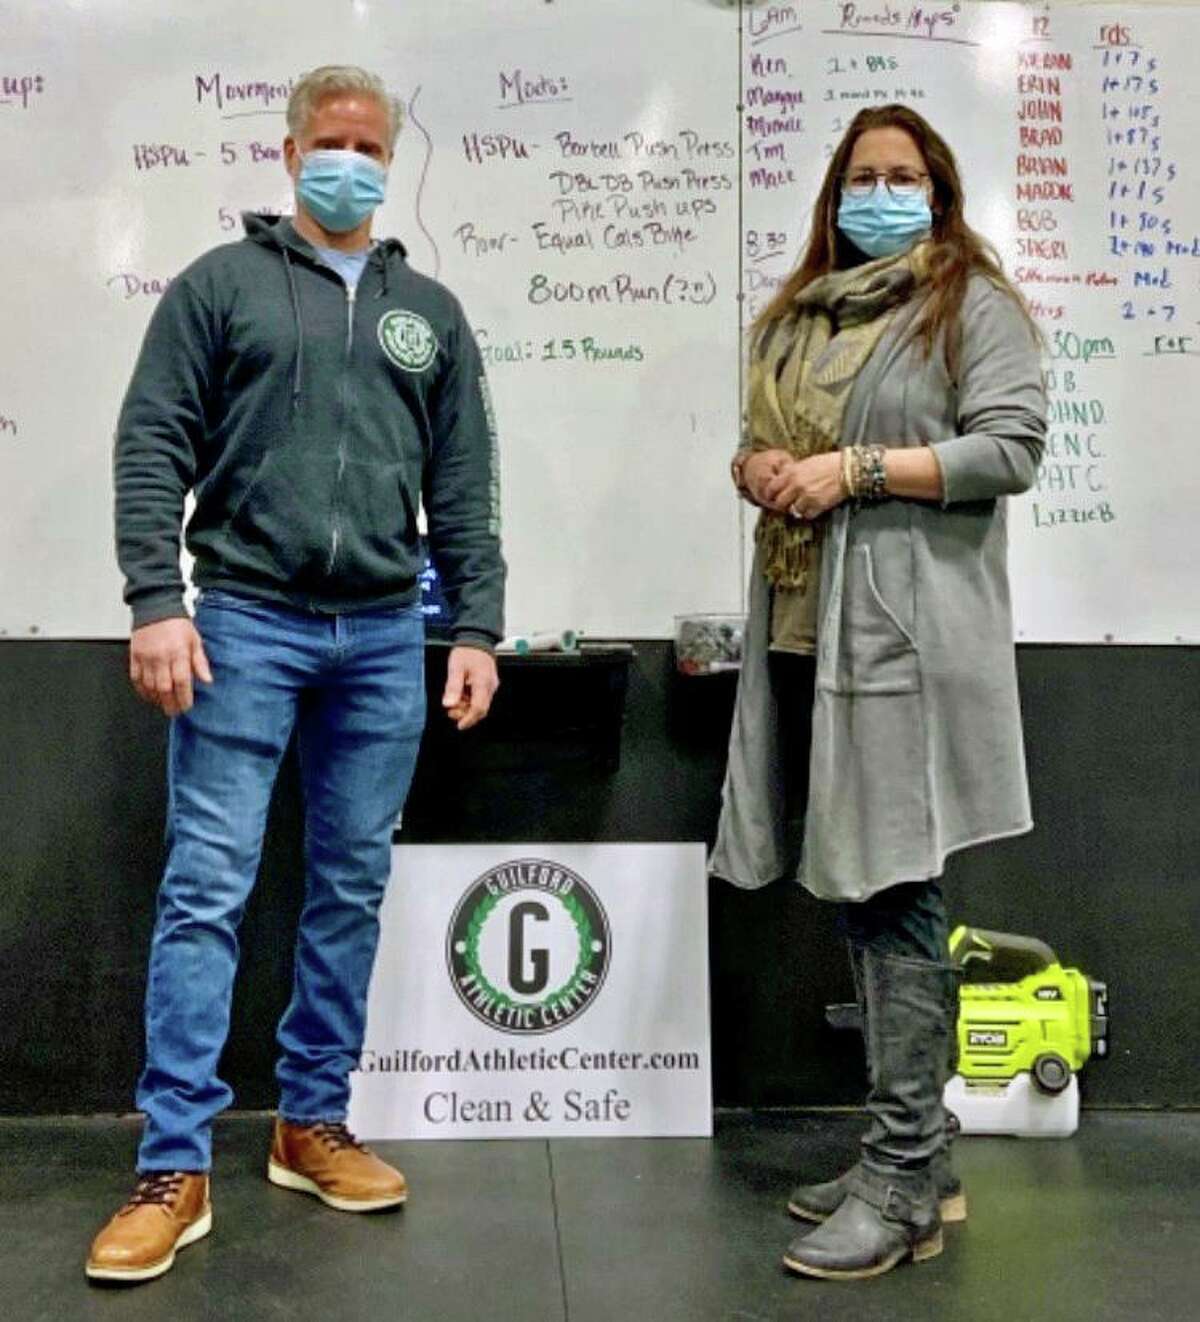 Clint Zeidenberg and Hannah Jurewicz, a Guilford psychologist, at the Guilford Athletic Center, who created the unique program, which comprises a one-hour workout followed by a recovery meeting.